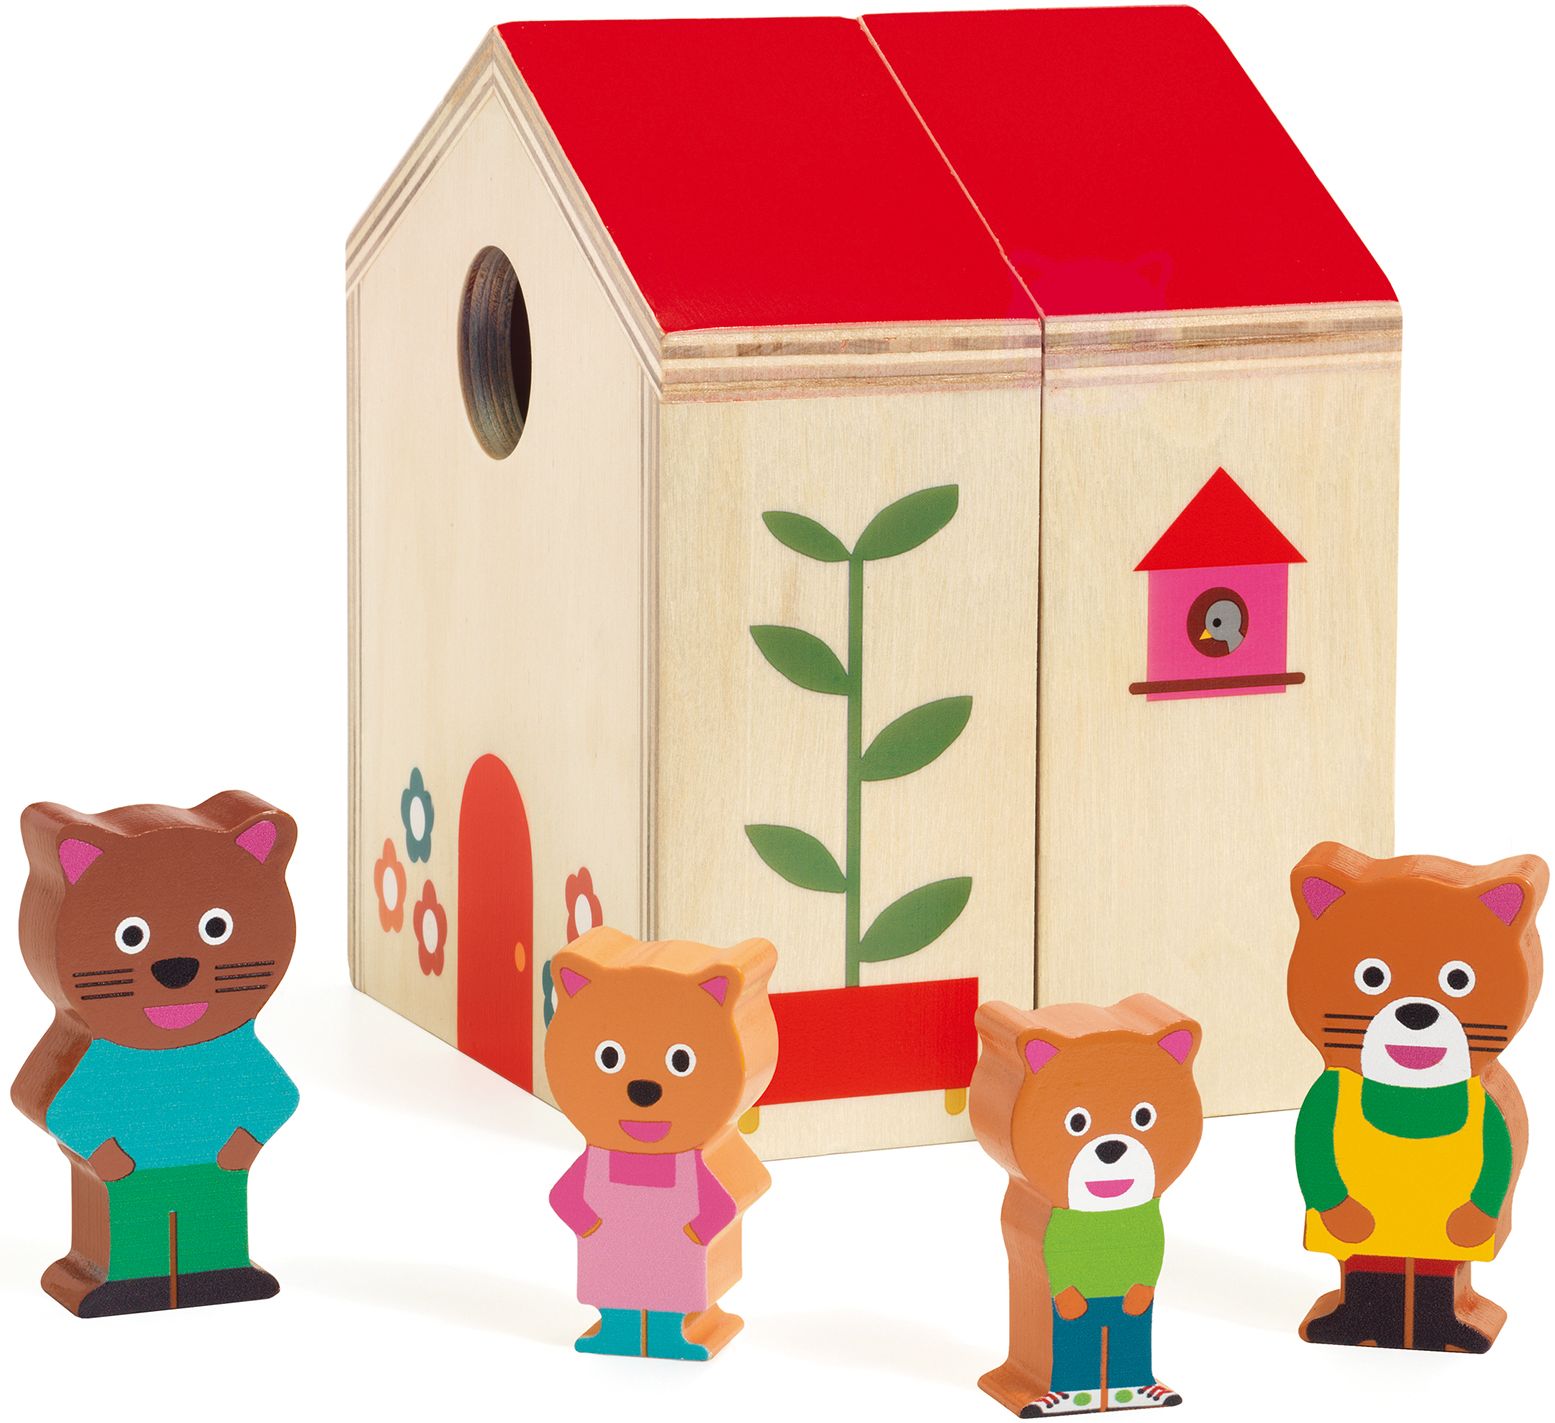 Djeco Early years - Early development toys Minihouse